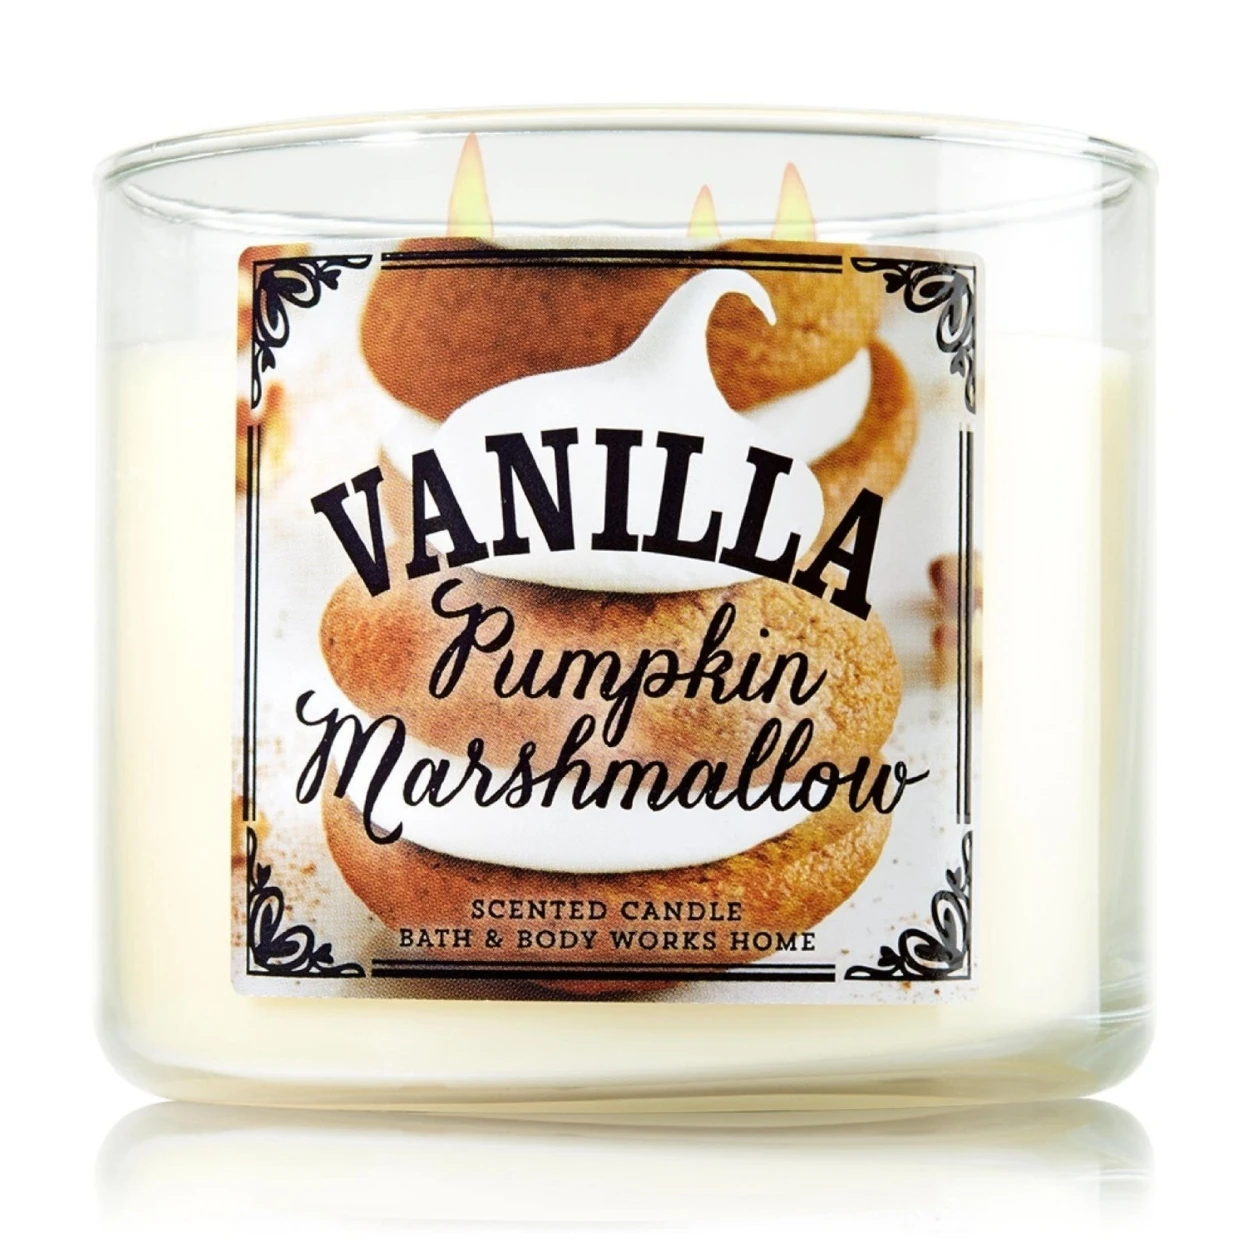 BATH & BODY WORKS VANILLA PUMPKIN MARSHMALLOW SCENTED CANDLE 3 WICK 14.5OZ LARGE 